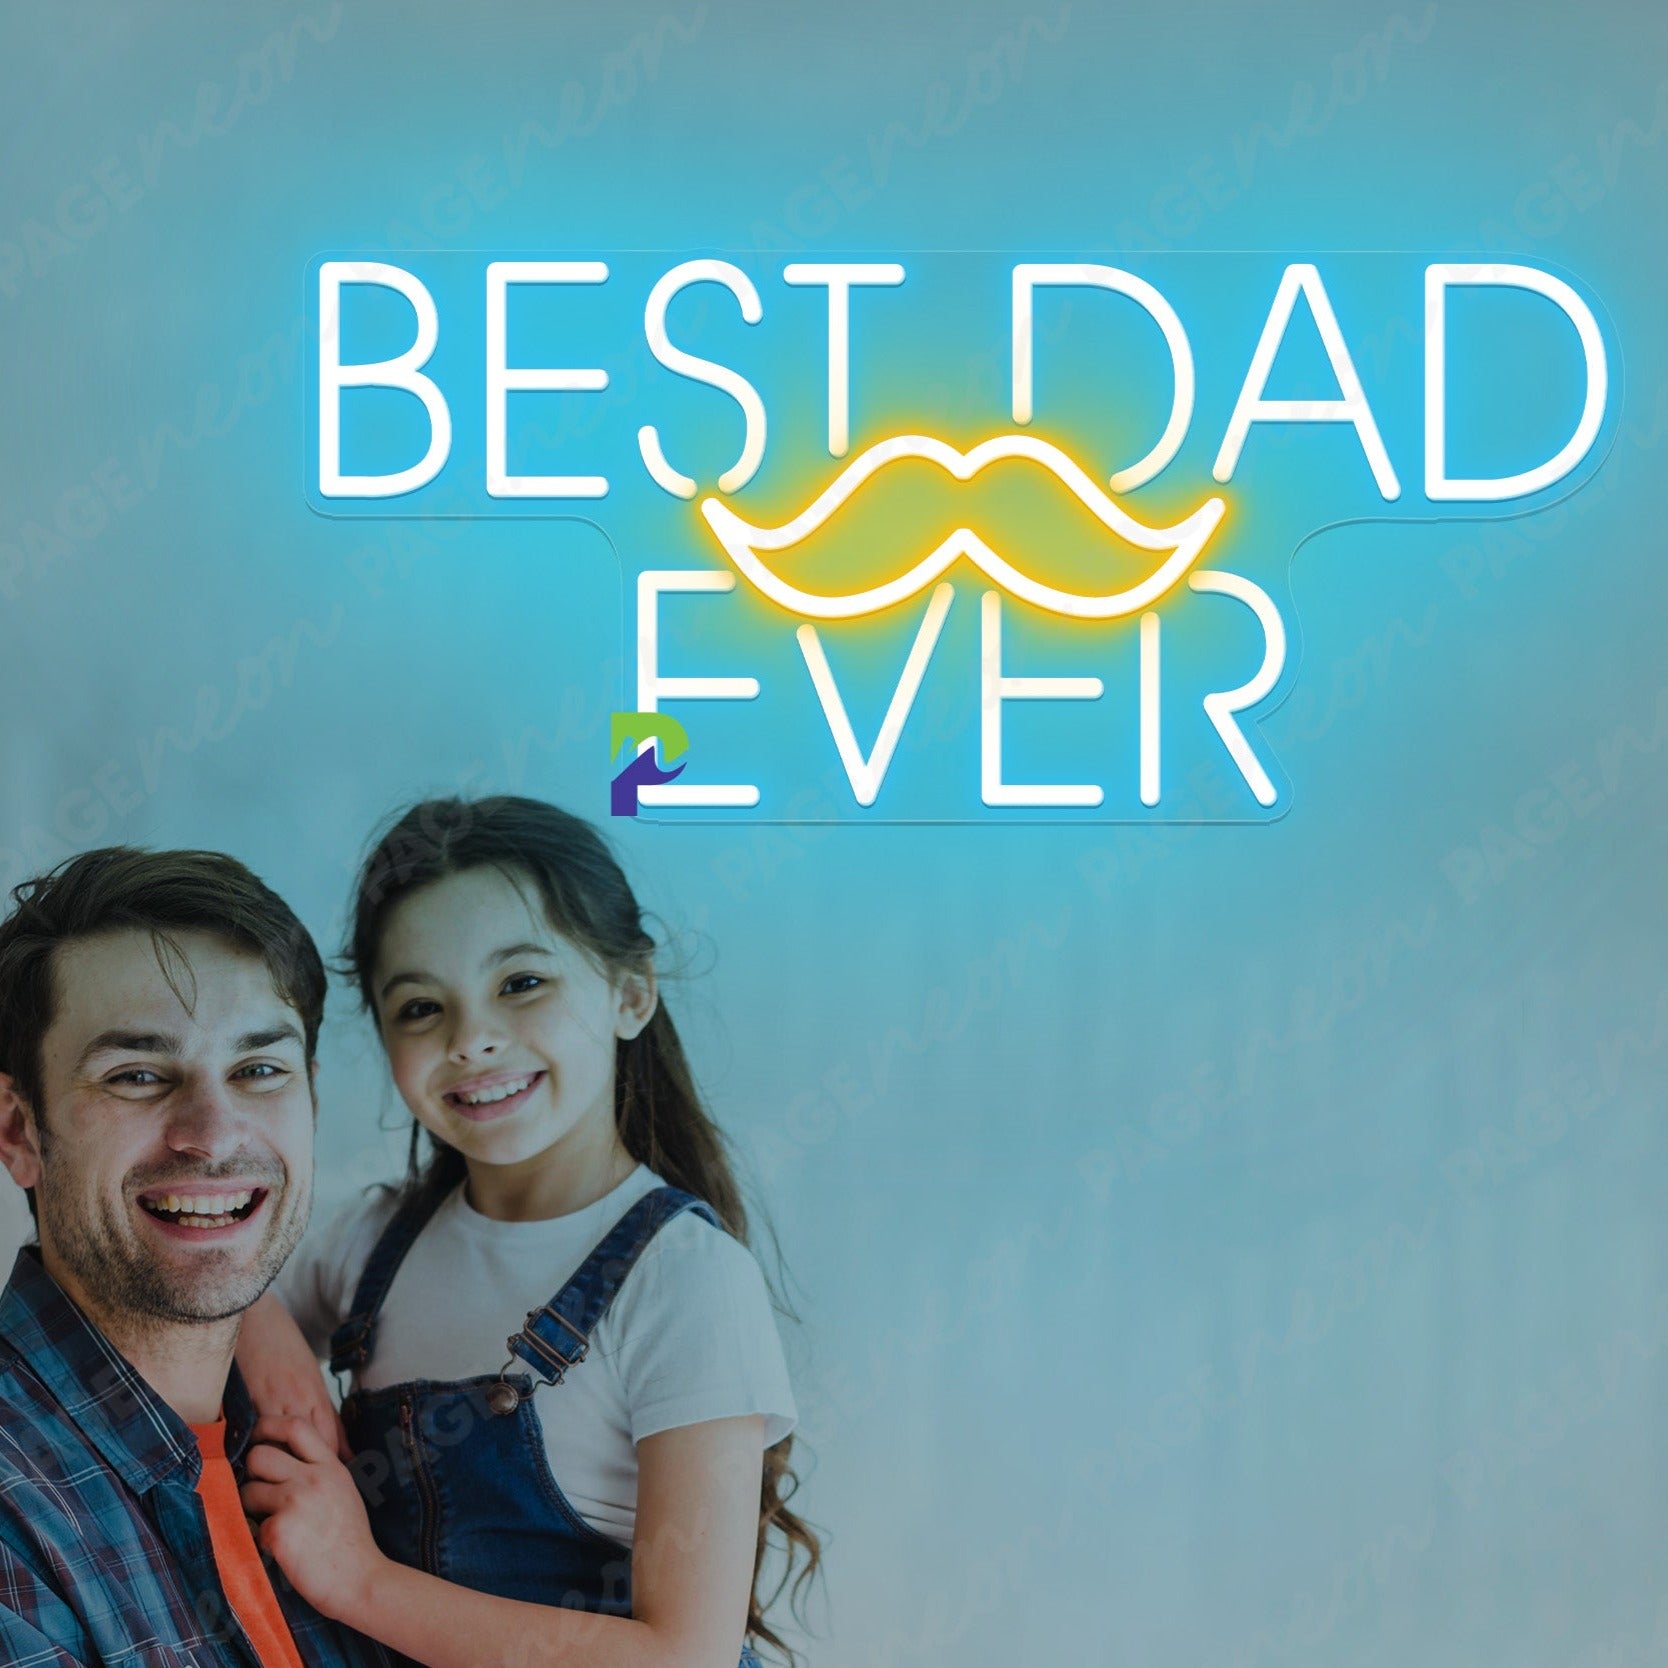 Best Dad Ever Neon Sign Fathers Day Led Light light blue